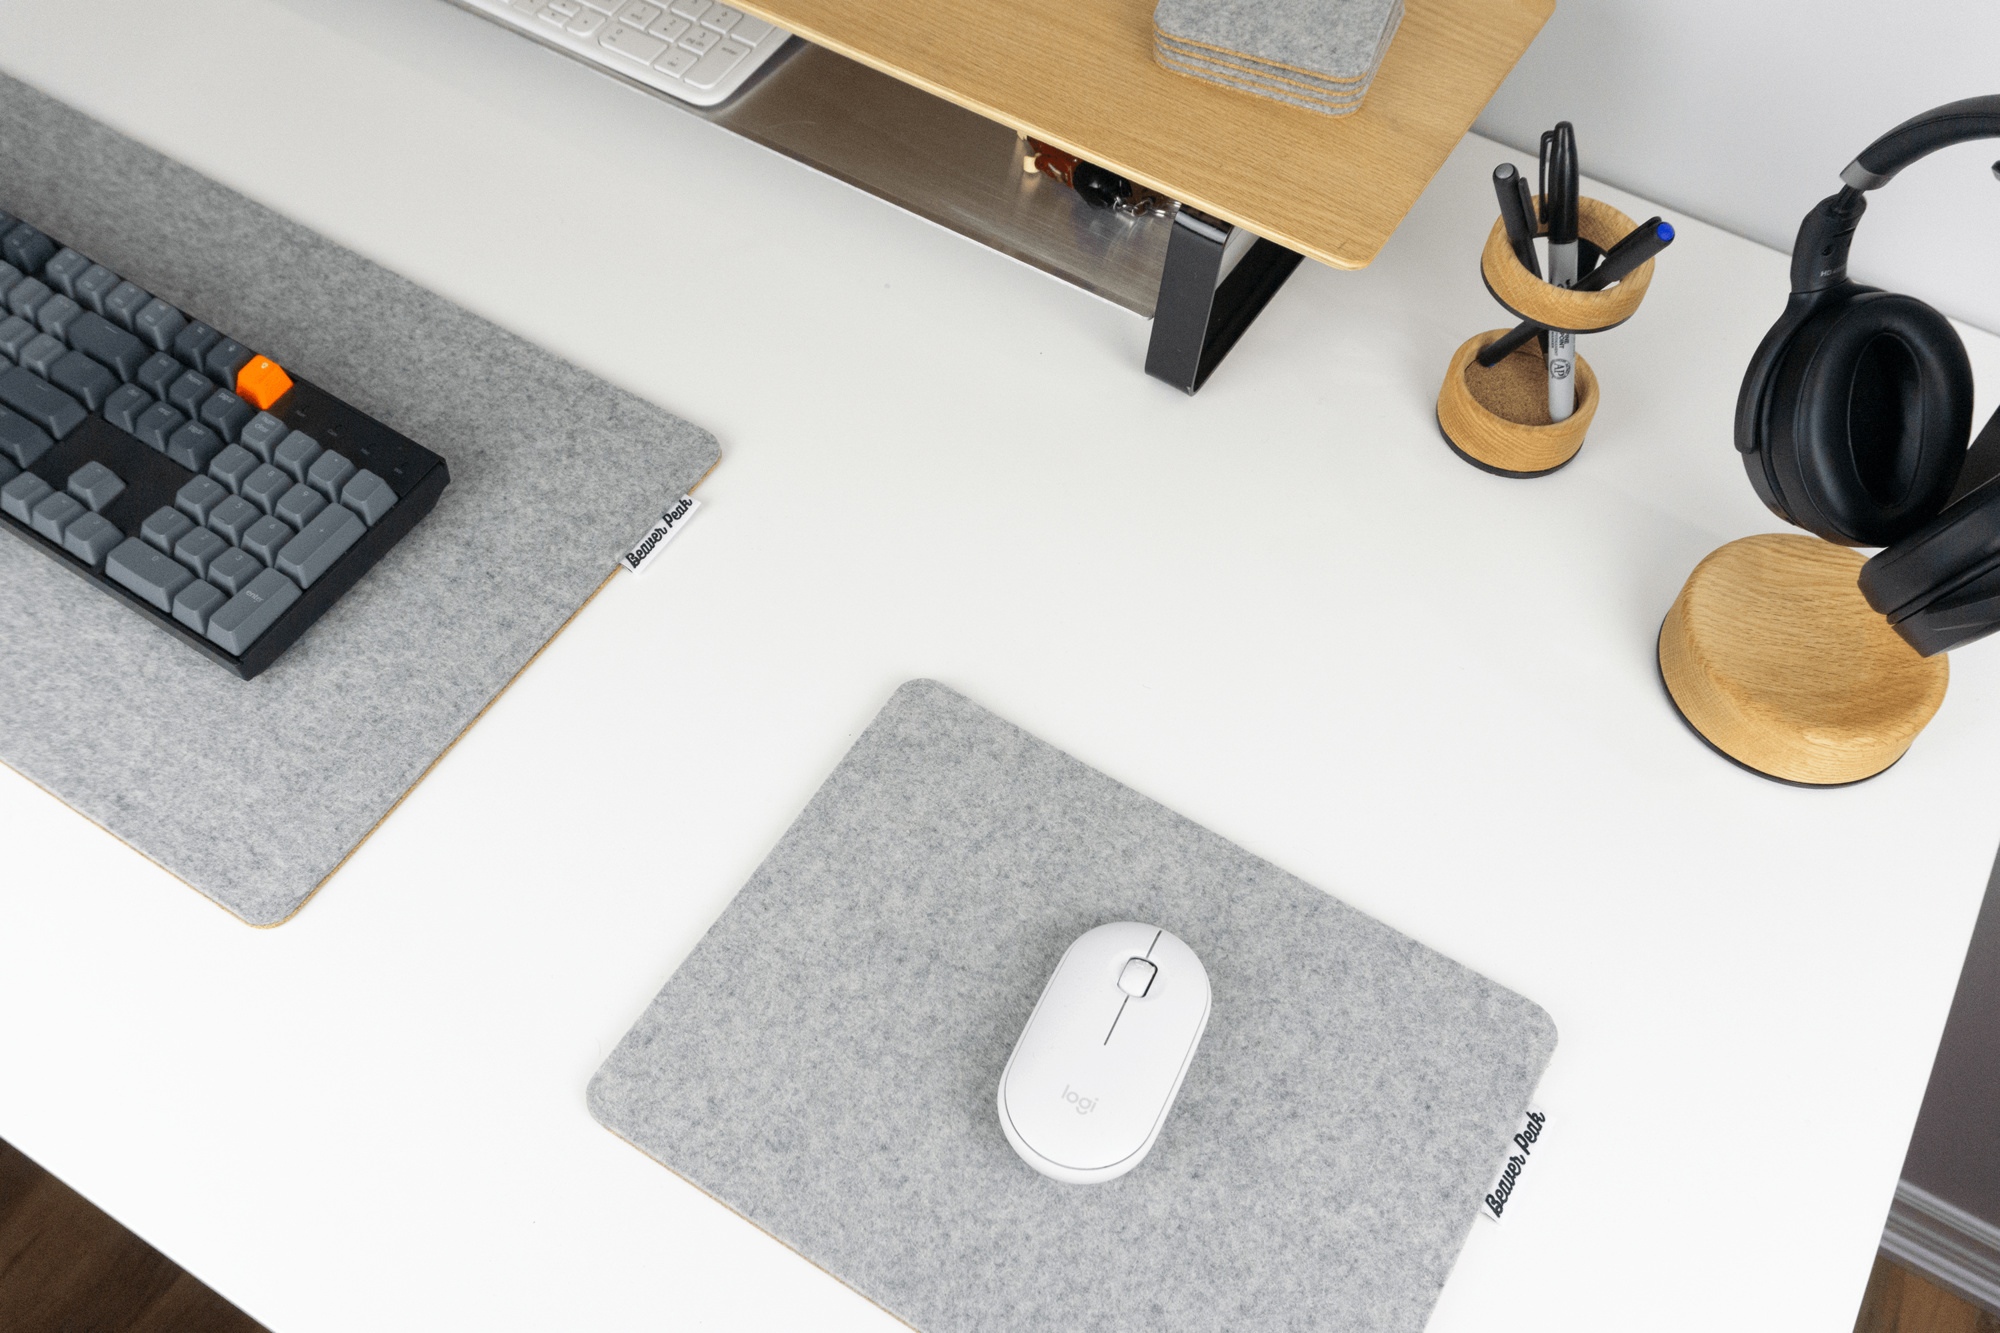 Grey wool mouse pad next to wool felt desk mat and wooden desk shelf with storage. Wooden pen holder and headphone stand at corner of desk